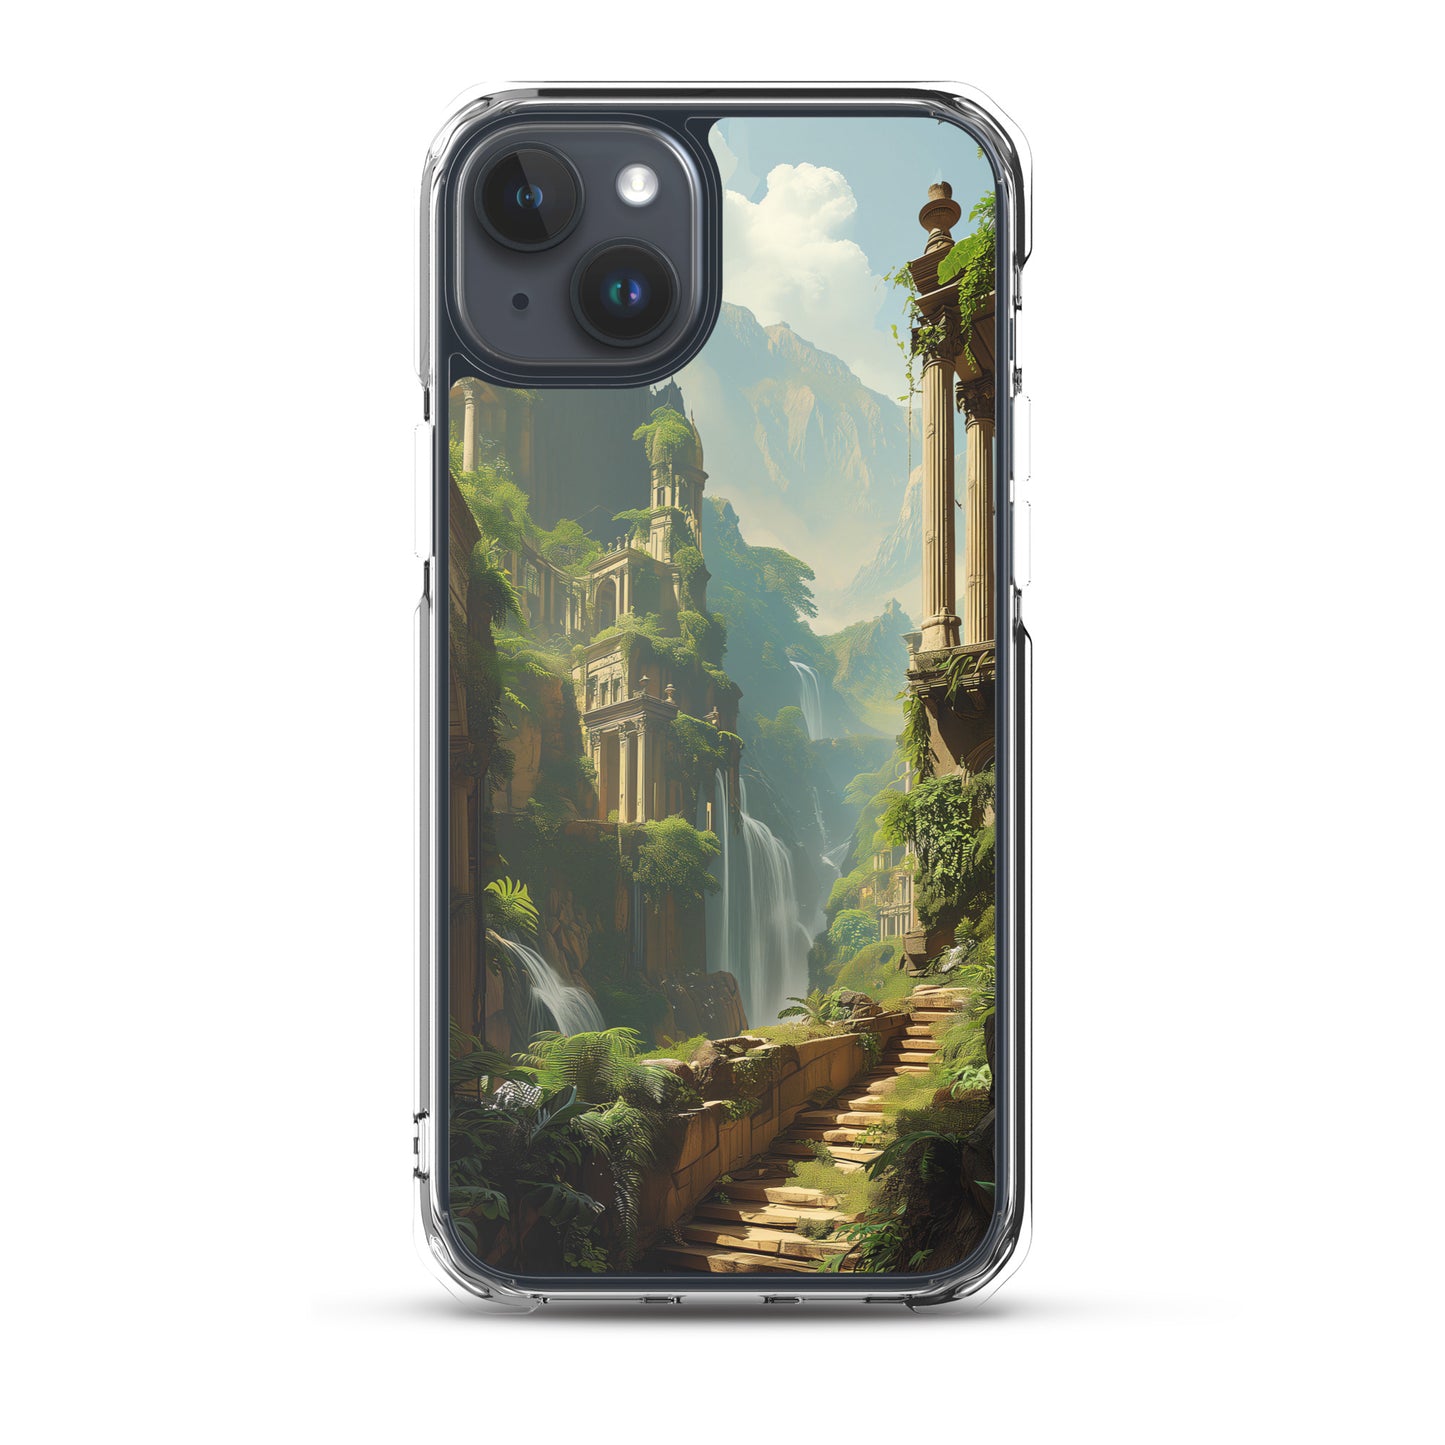 iPhone Case - Lost Temples of the Verdure